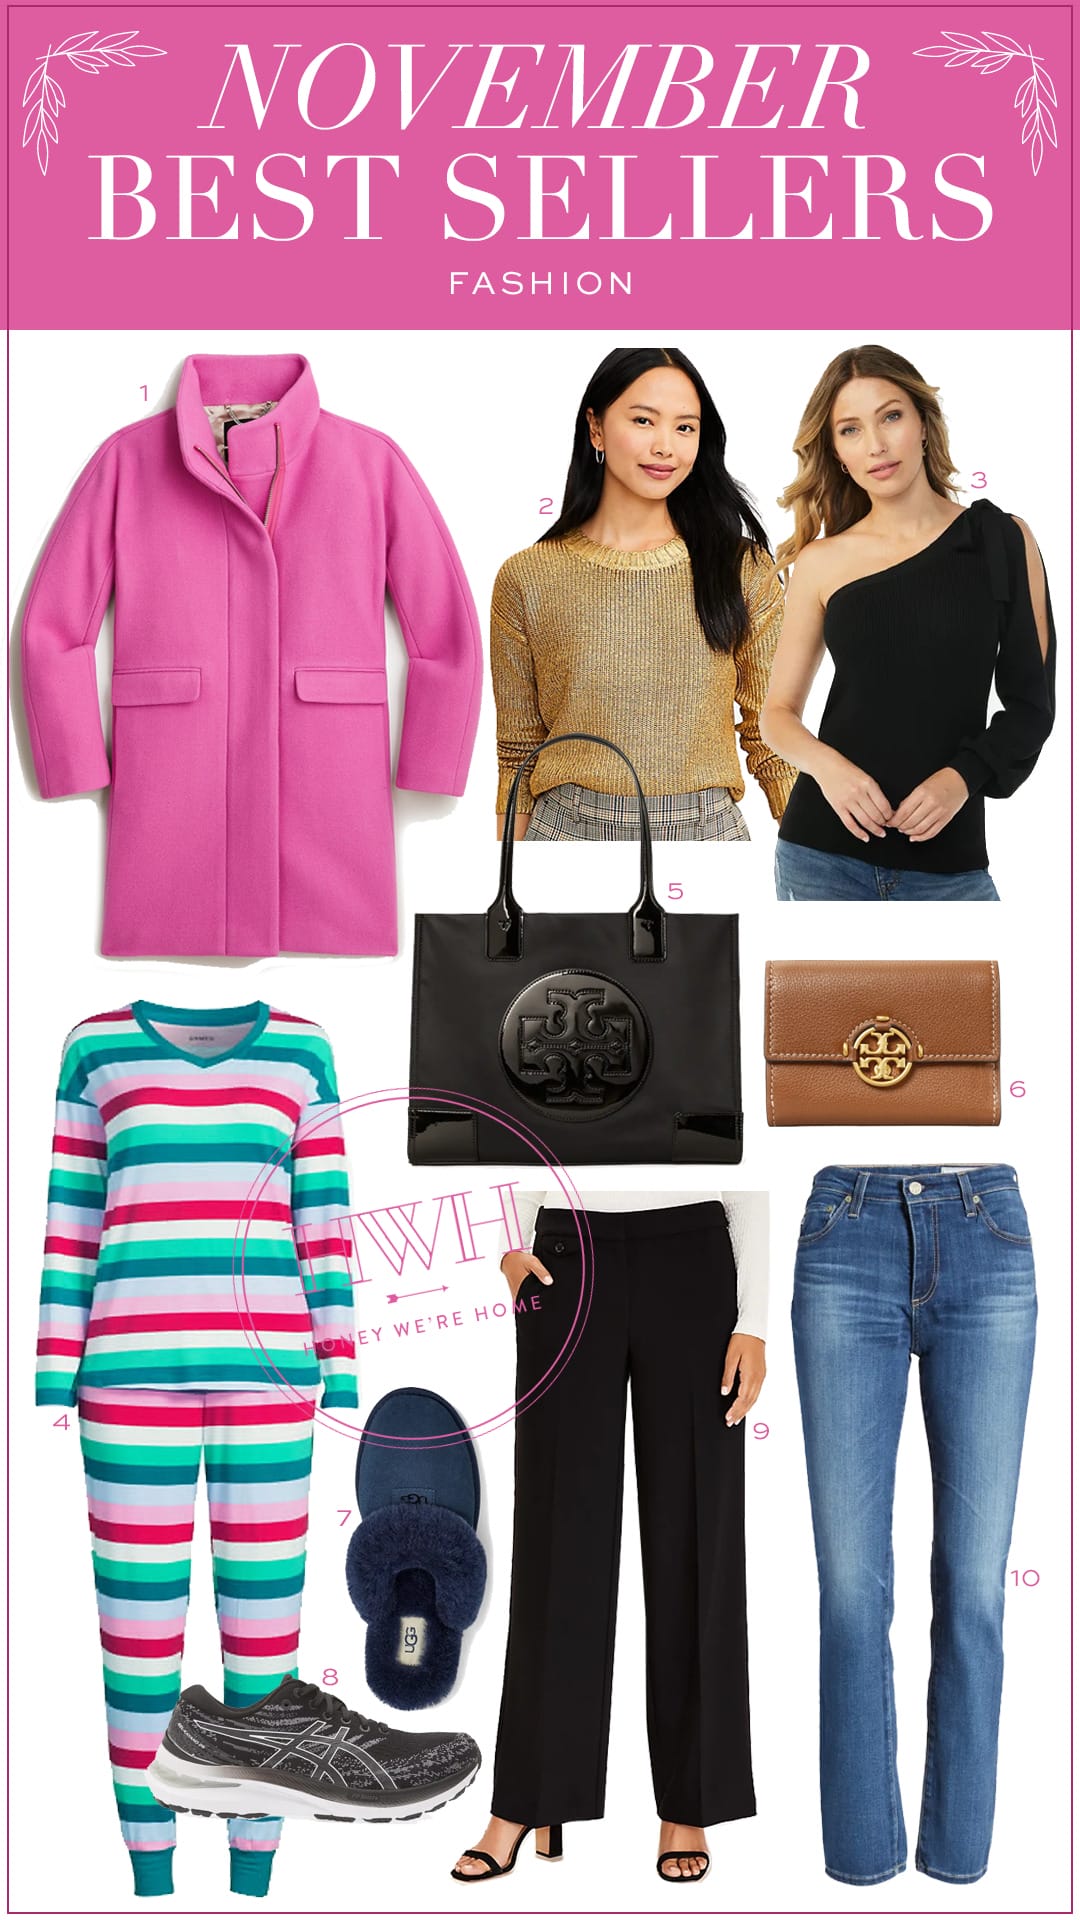 30 Winter Outfits & November Best Sellers